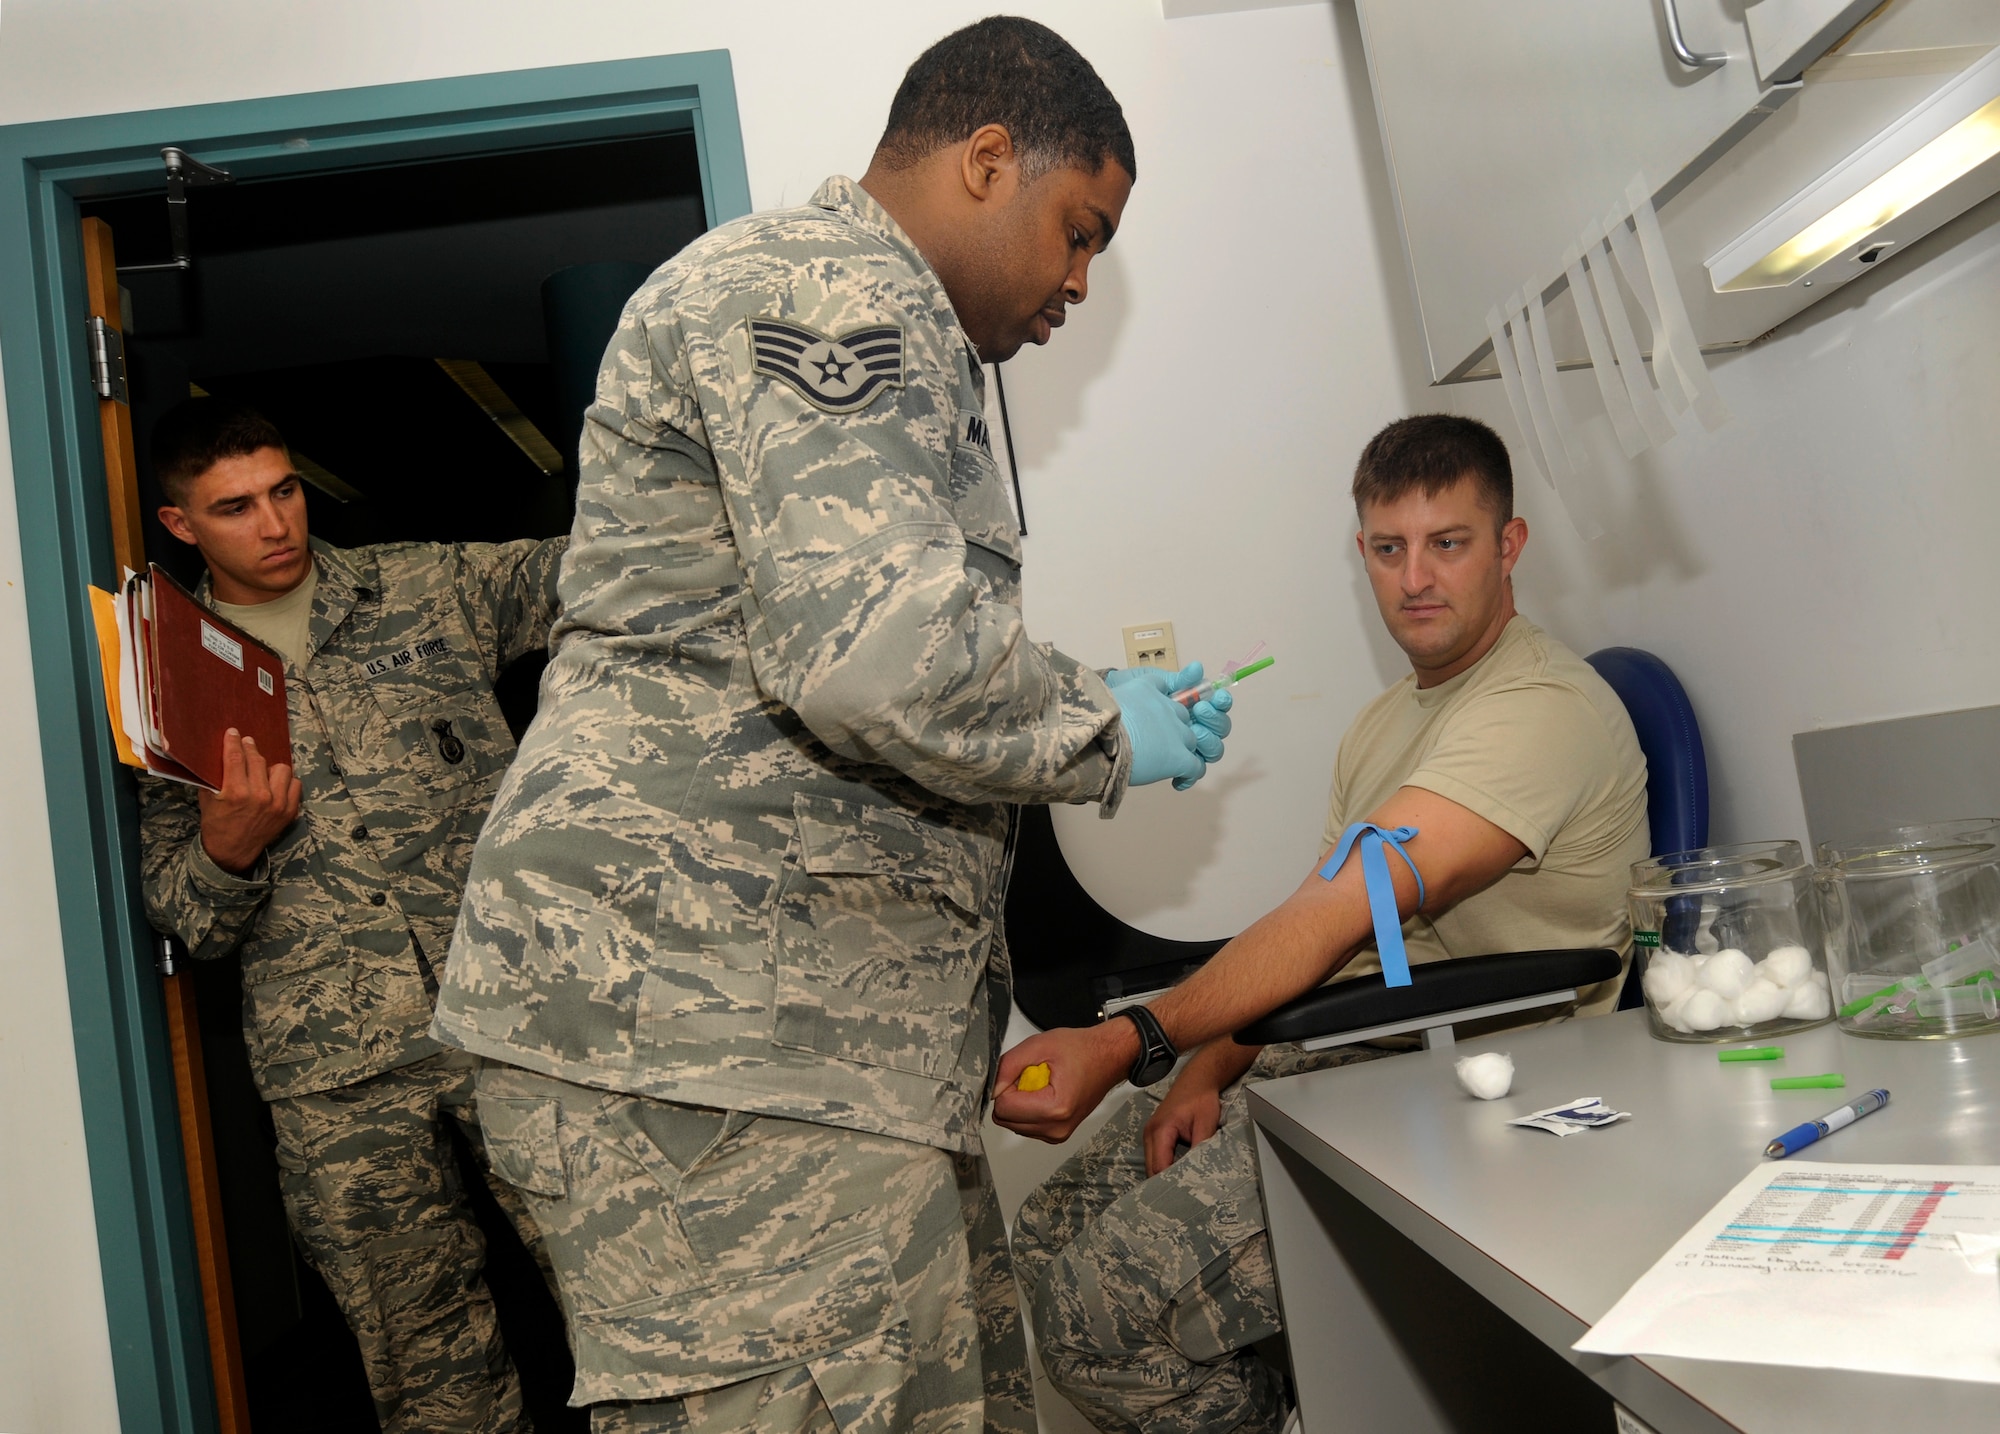 Oregon Air National Guard Staff Sgt. Clifton Matthews, 142nd Fighter Wing Medical Group, prepares to take a blood samples from Staff Sgt. Rockney Schock, (right) and Senior Airmen Benjamin Courtney (left), 142nd Fighter Wing Security Forces Squadron, as part of the in processing procedures at the Portland Air National Guard Base, Ore., Aug. 9, 2013.  (Air National Guard photo by Tech. Sgt. John Hughel, 142nd Fighter Wing Public Affairs/released)